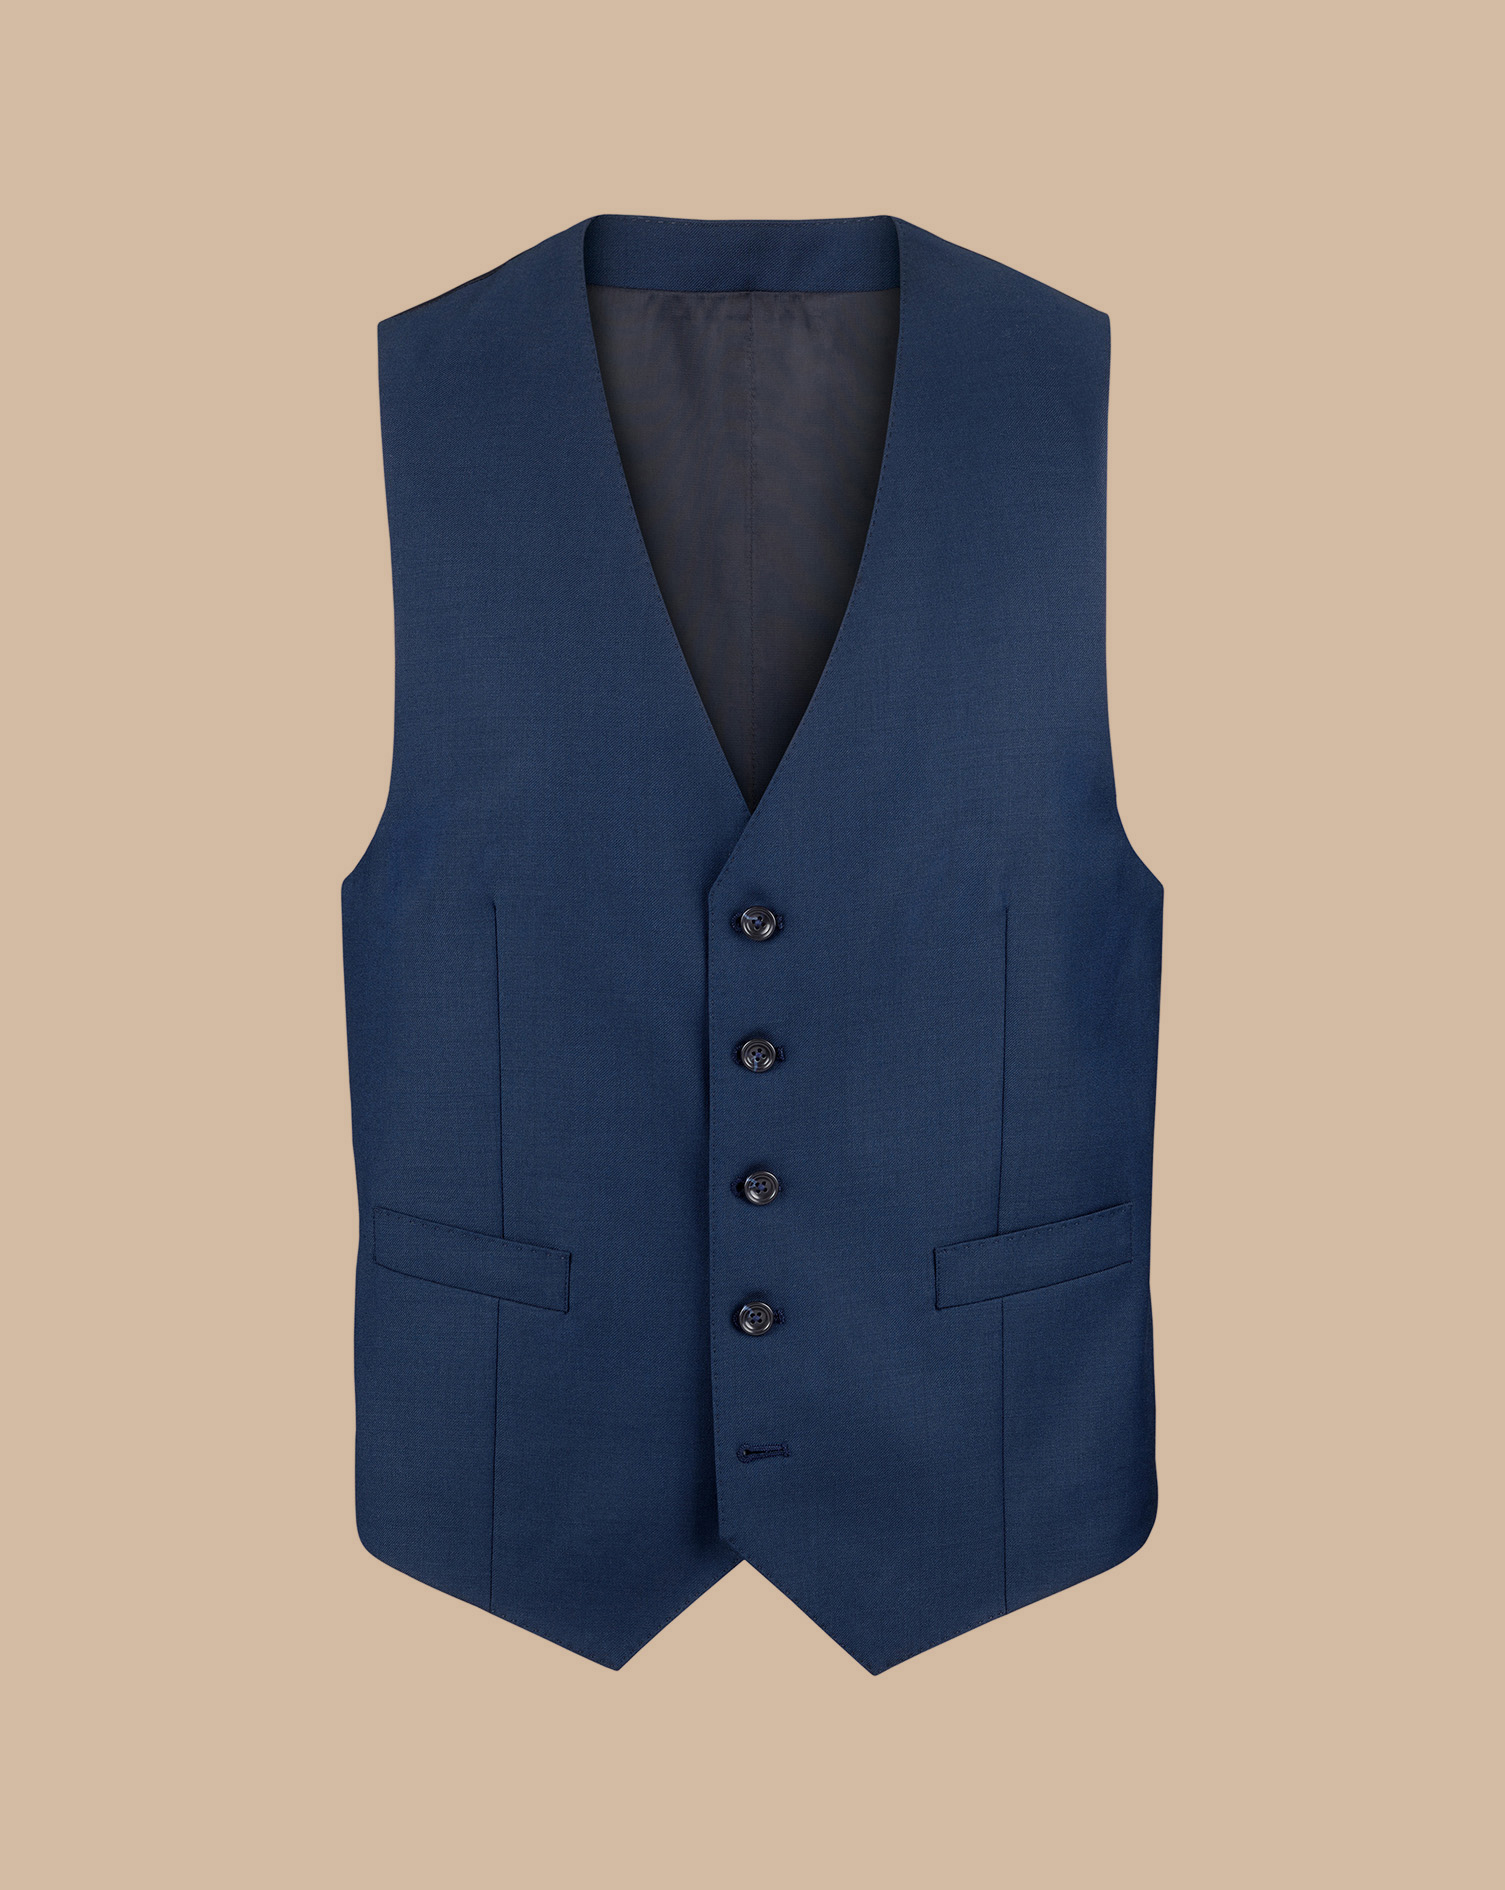 Men's Charles Tyrwhitt Natural Stretch Twill Suit Waistcoat - Royal Blue Size w40 Wool
